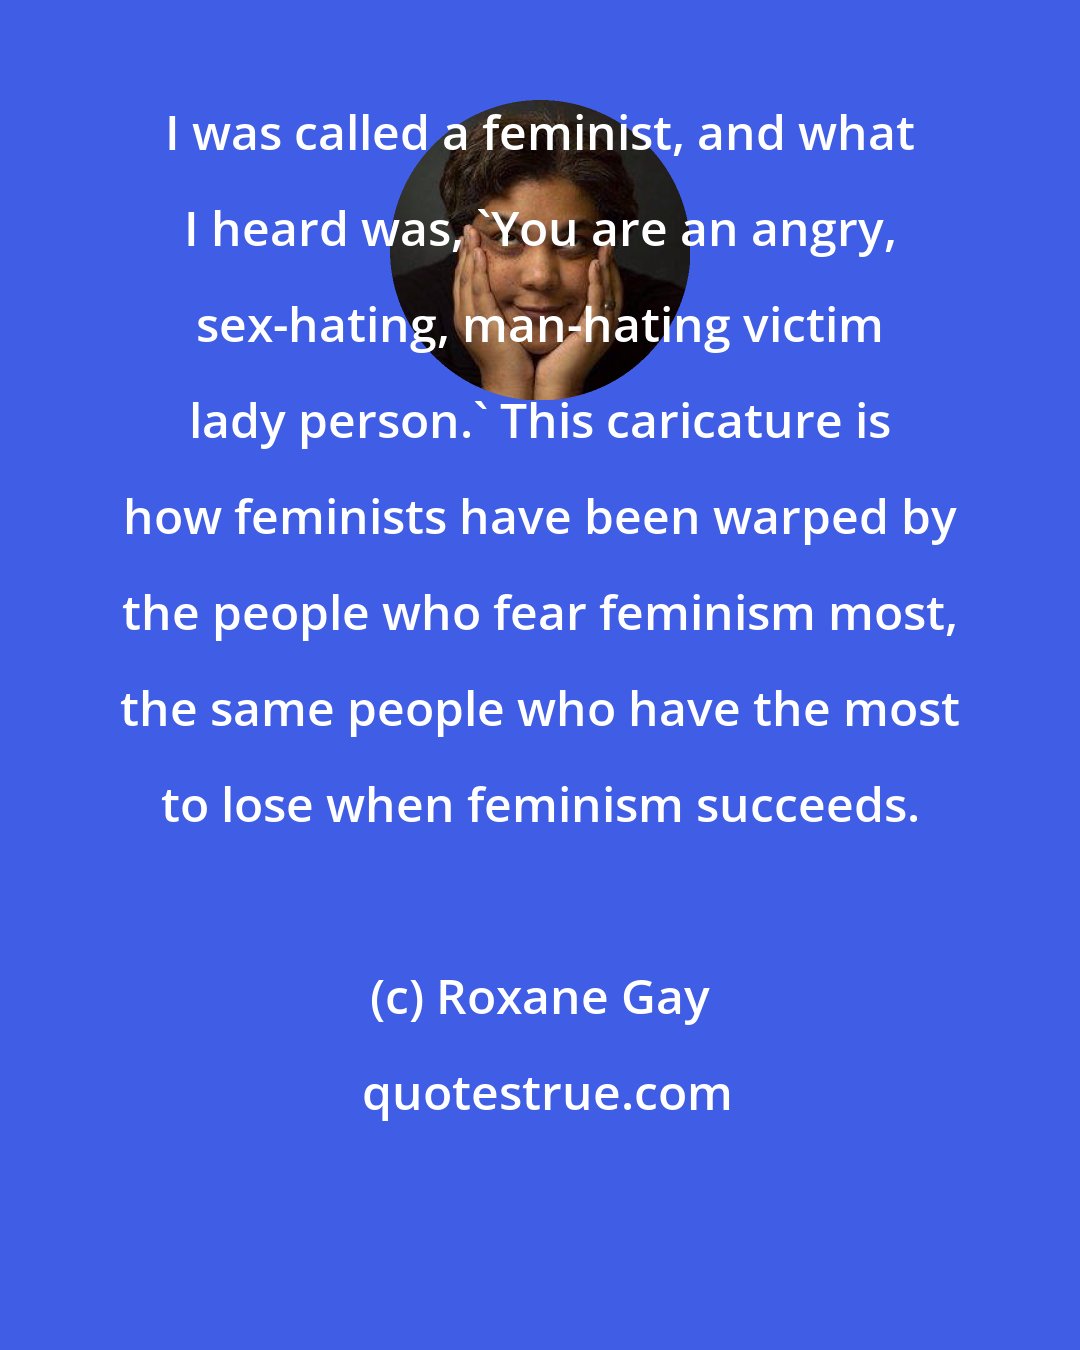 Roxane Gay: I was called a feminist, and what I heard was, 'You are an angry, sex-hating, man-hating victim lady person.' This caricature is how feminists have been warped by the people who fear feminism most, the same people who have the most to lose when feminism succeeds.